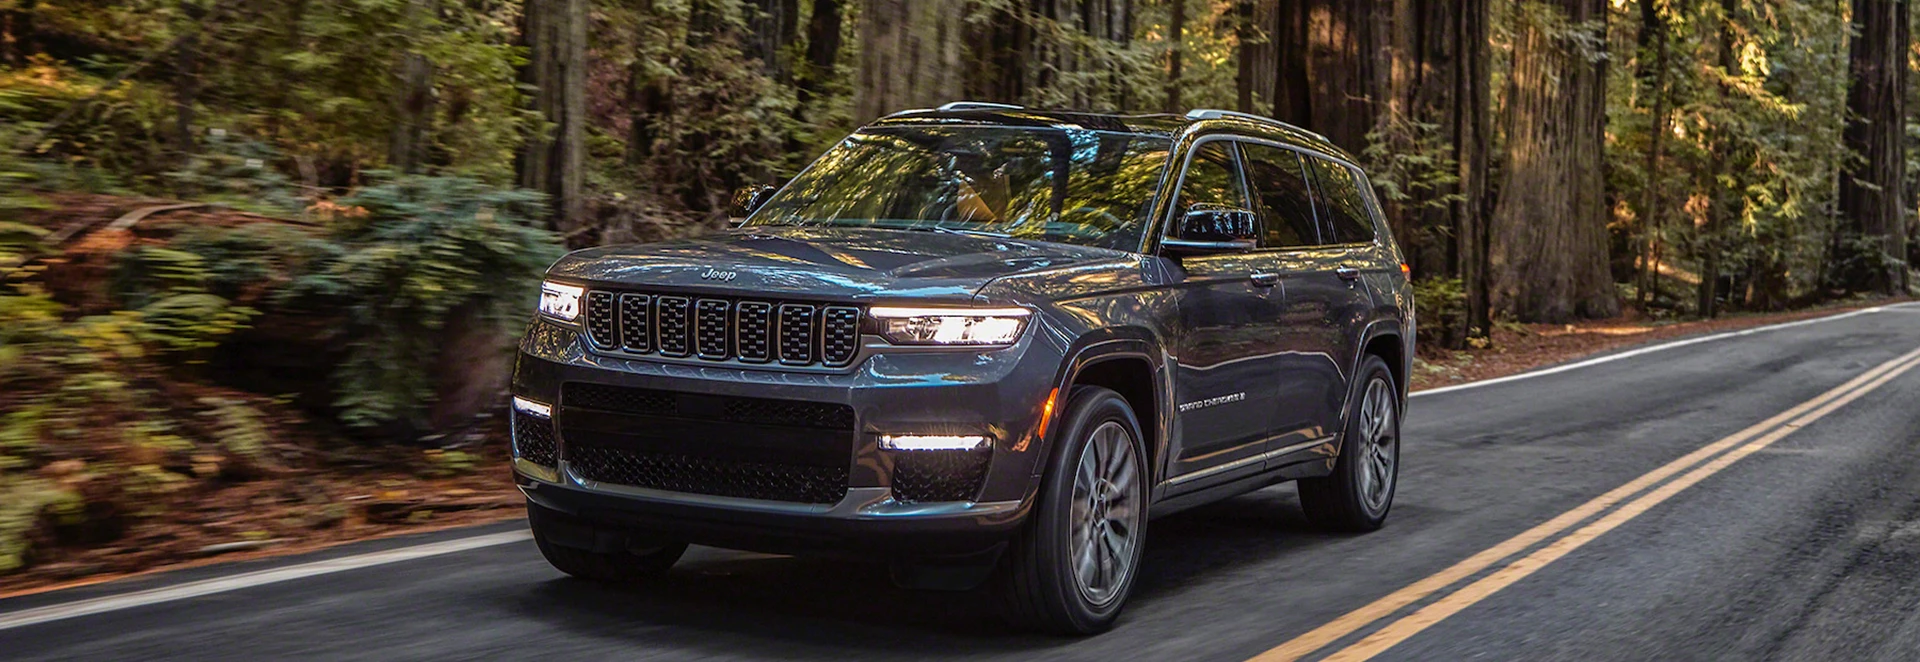 New 2021 Jeep Grand Cherokee L revealed 